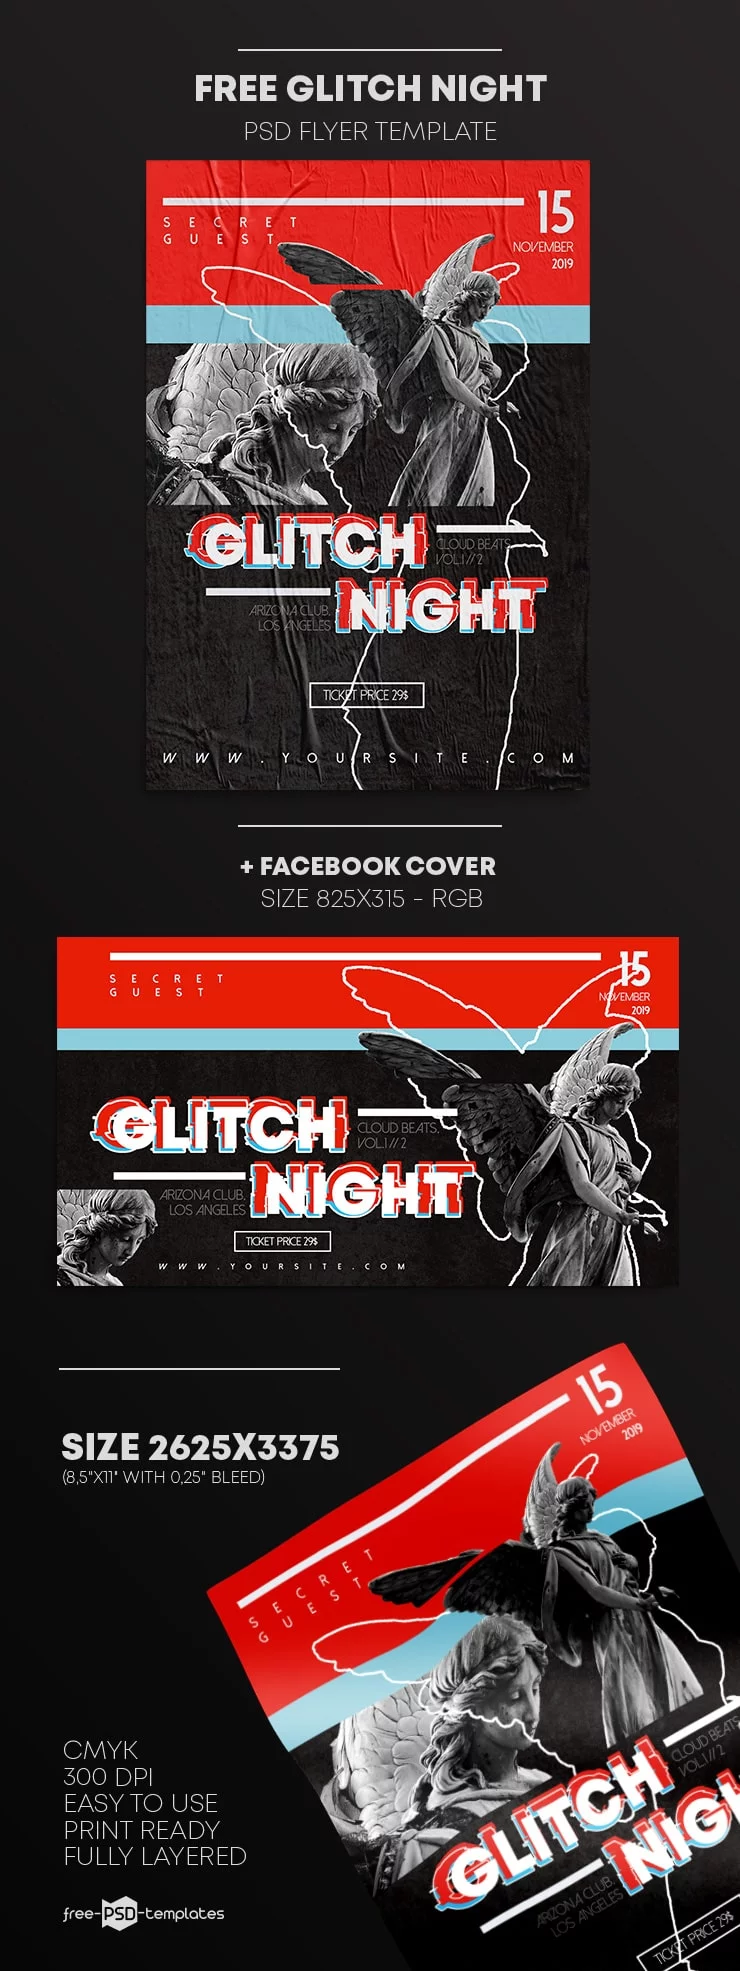 Free Glitch Night Flyer Template in PSD